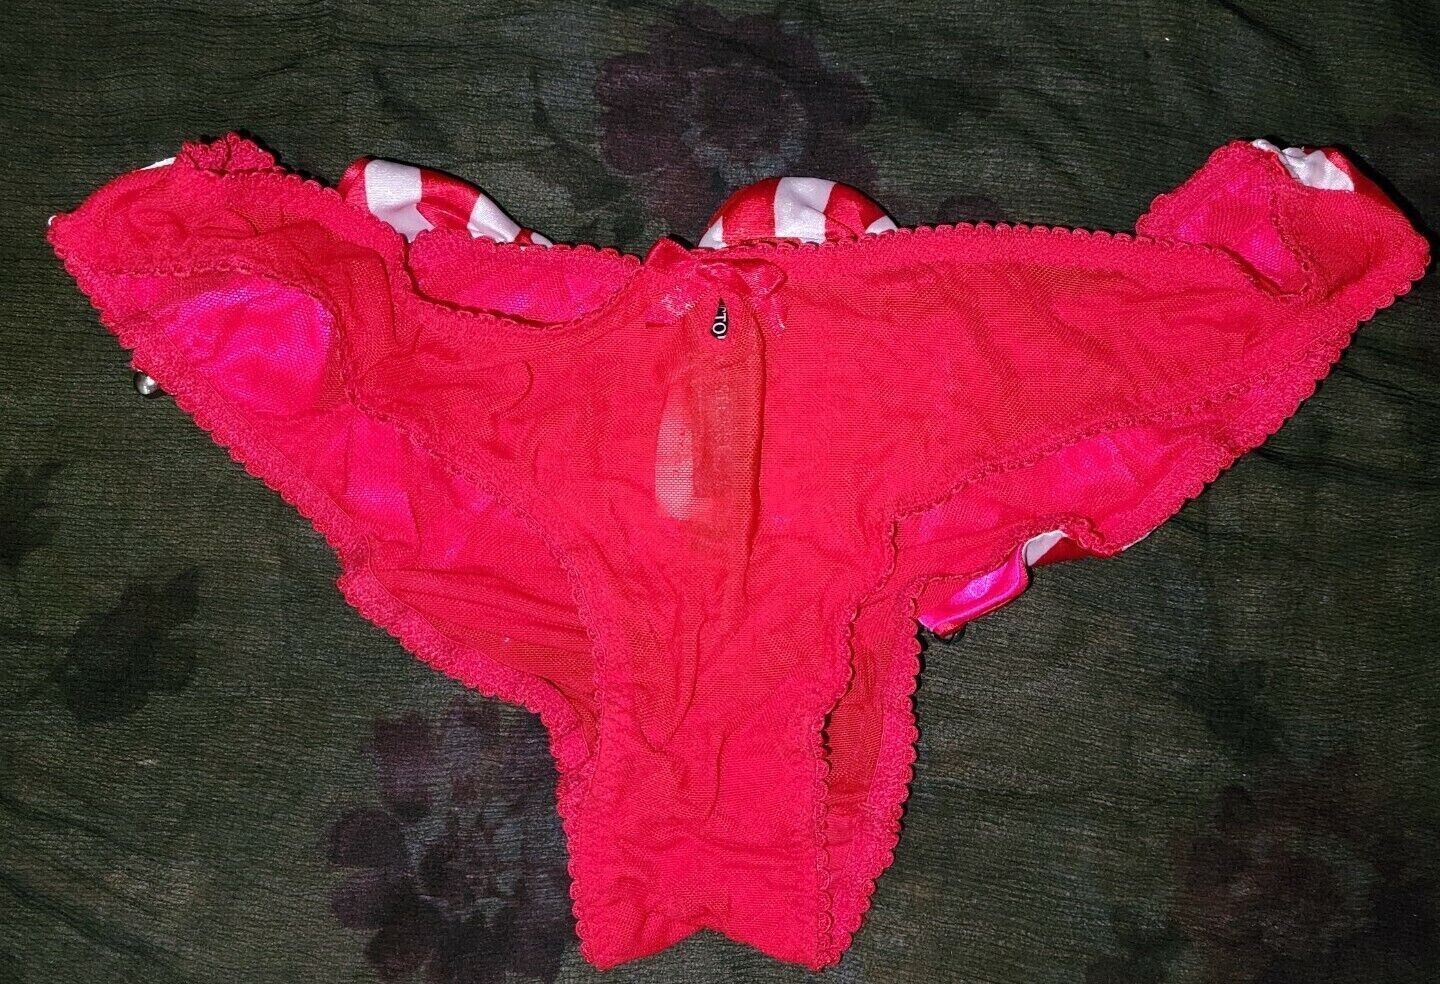 New with tags TORRID Open Back Cheeky Panty - Satin & Lace Bow RED